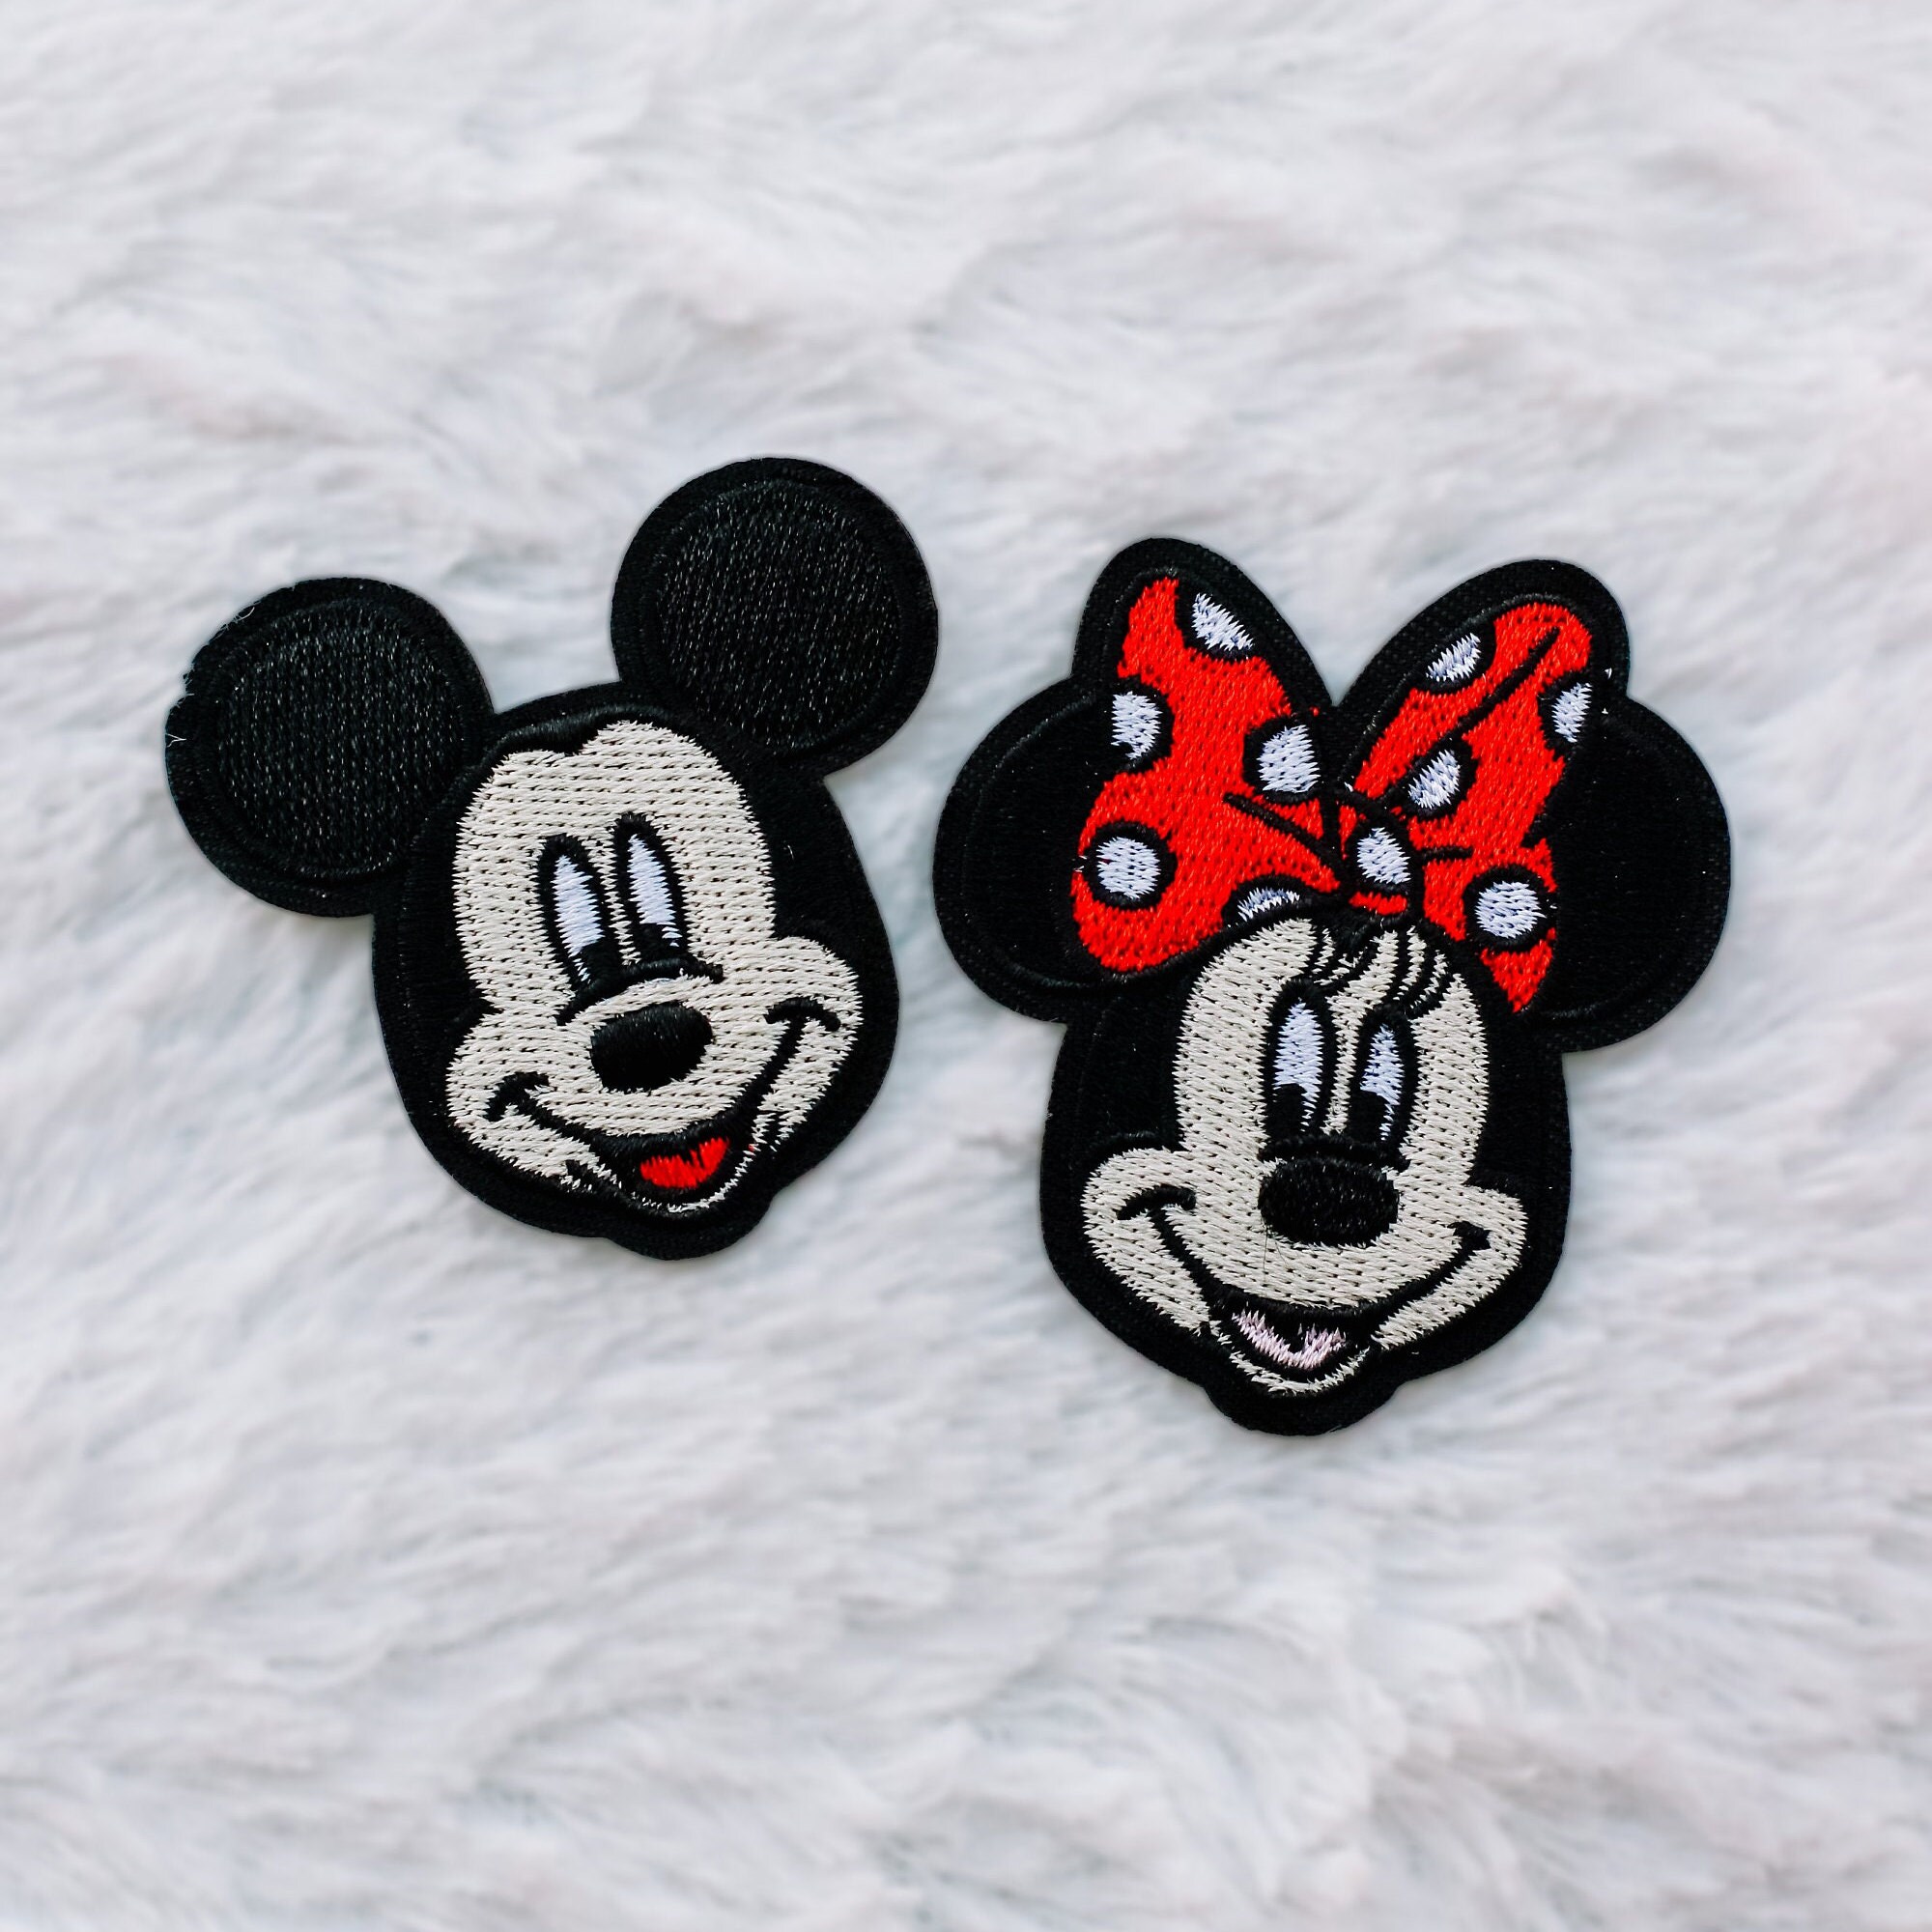 DISNEY BABY MICKEY MOUSE CHARACTER EMBROIDERED APPLIQUÉ PATCH SEW IRON ON